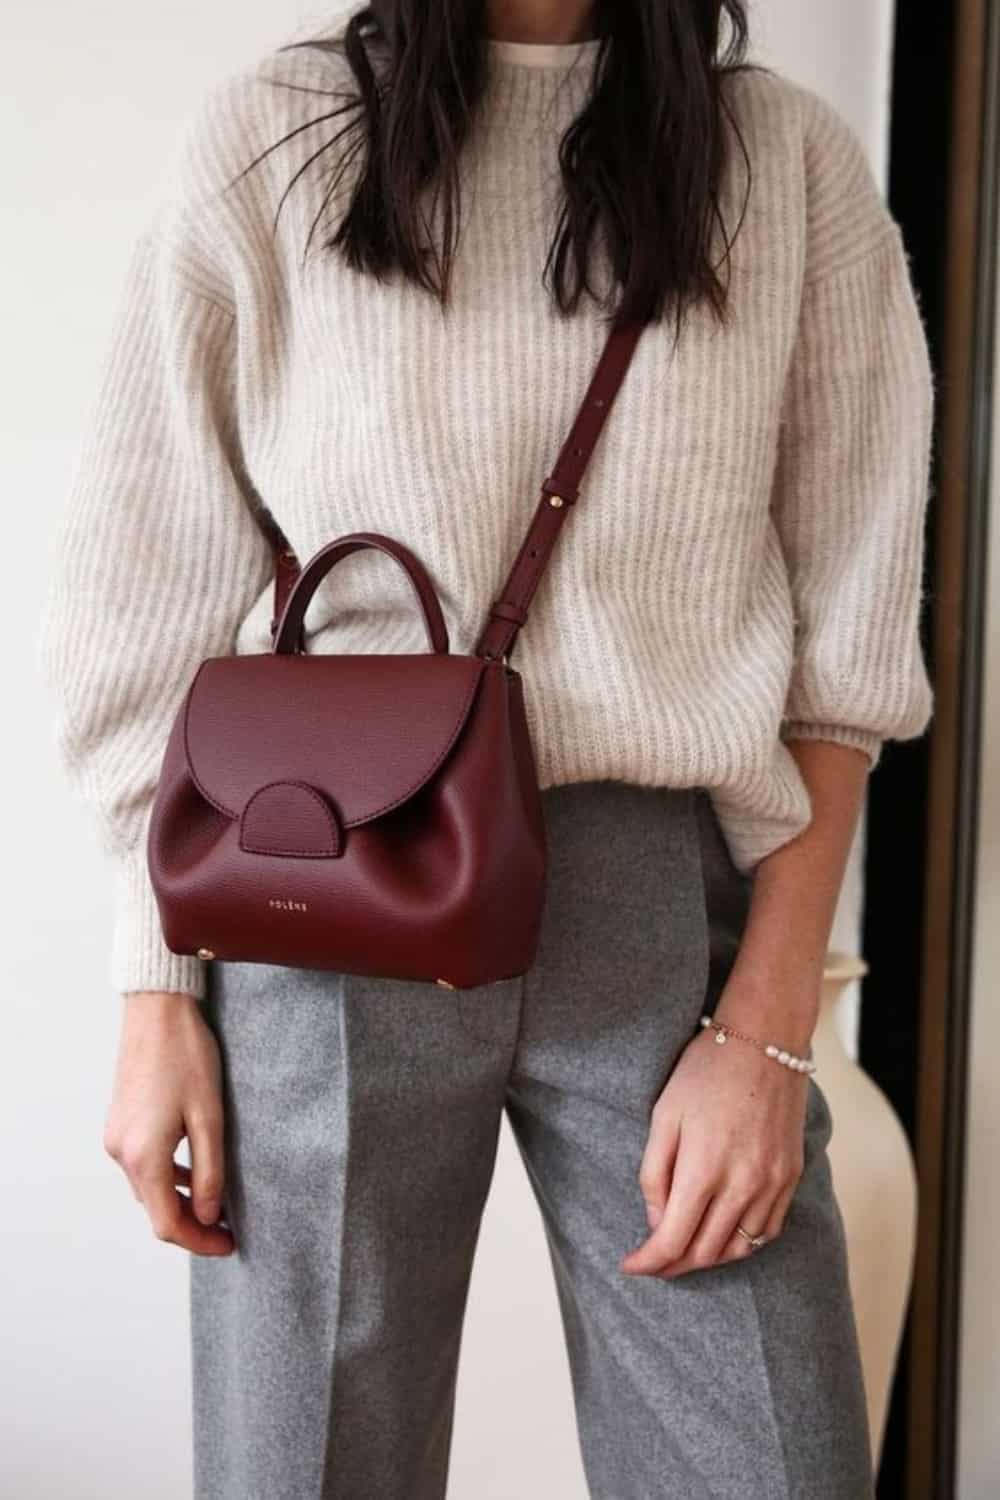 Crossbody bag with outfit